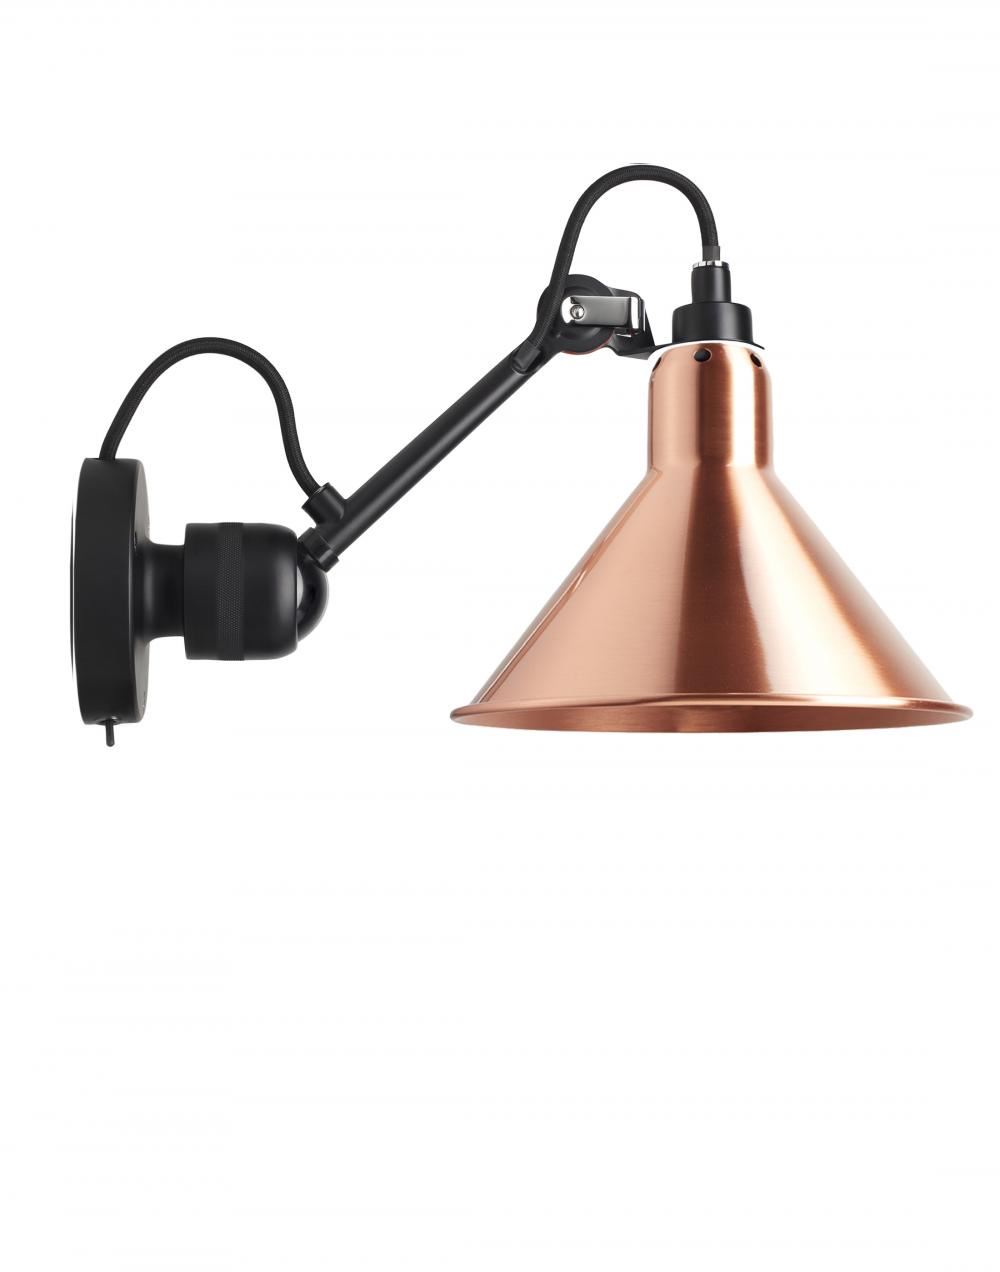 Lampe Gras 304 Small Wall Light Black Arm Copper Shade Conic Integral Switch